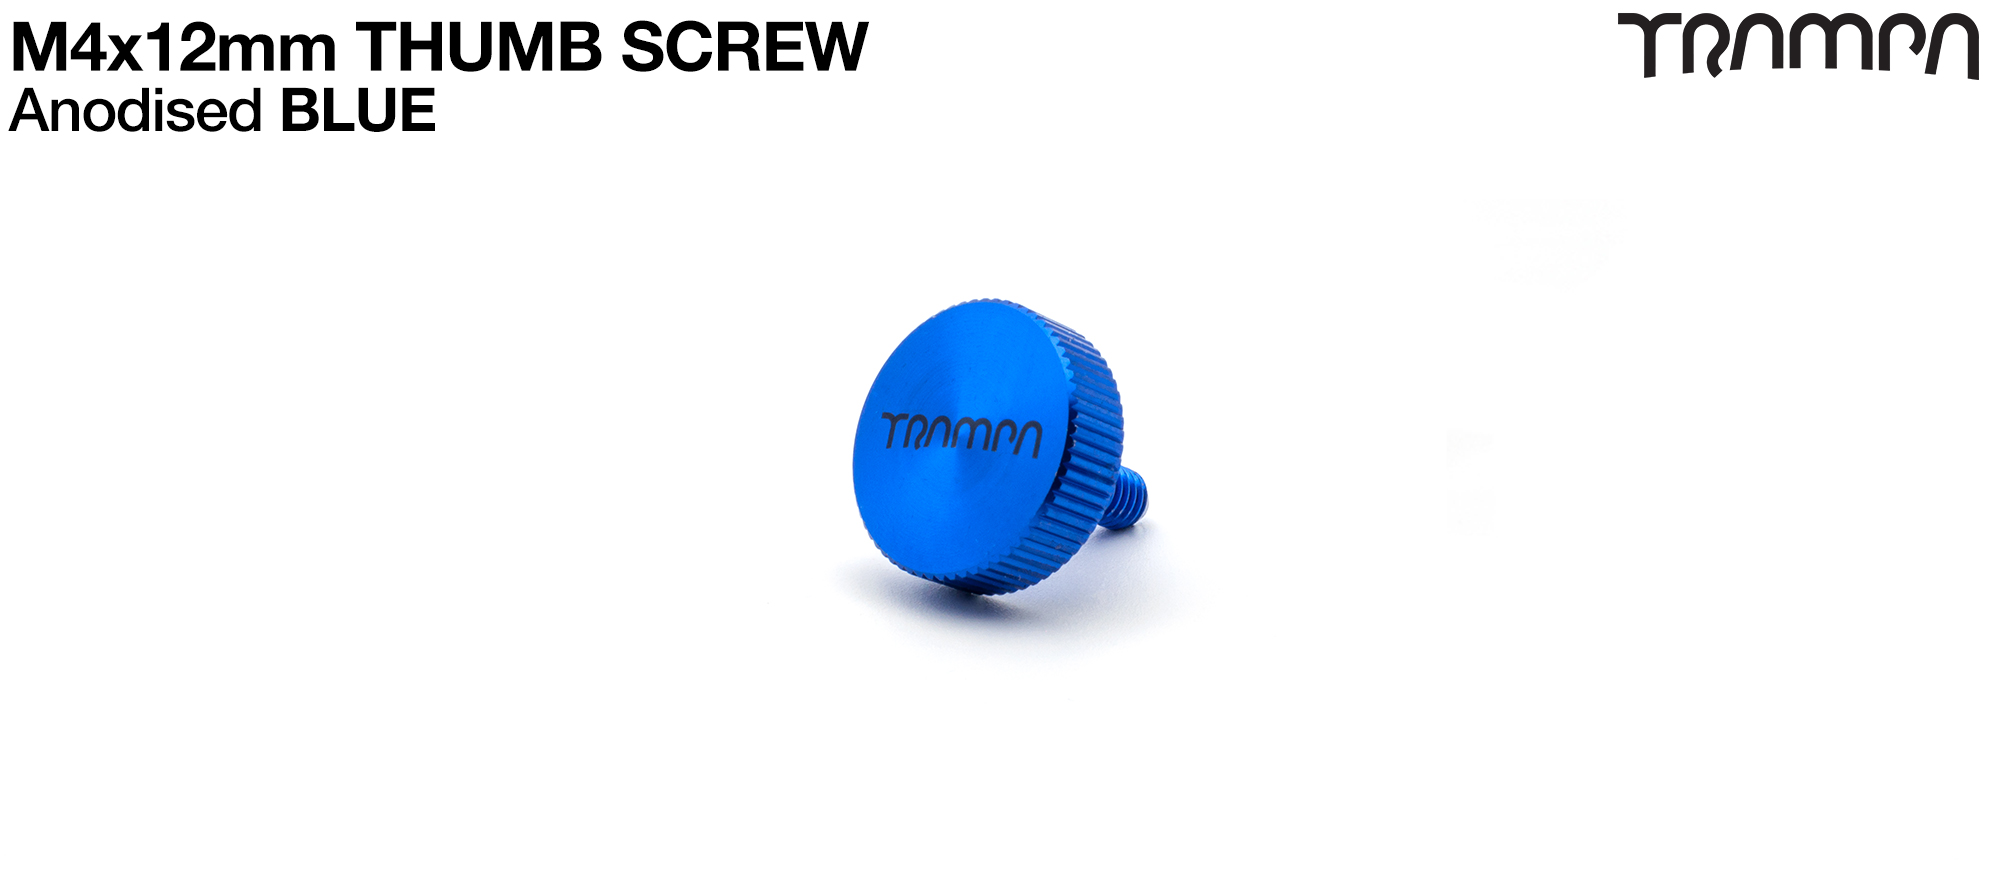 M4x 12mm Anodised Aluminium THUMB SCREW - colour co-ordinatingly secures the Inspection Pit lid on to the Battery Box - BLUE